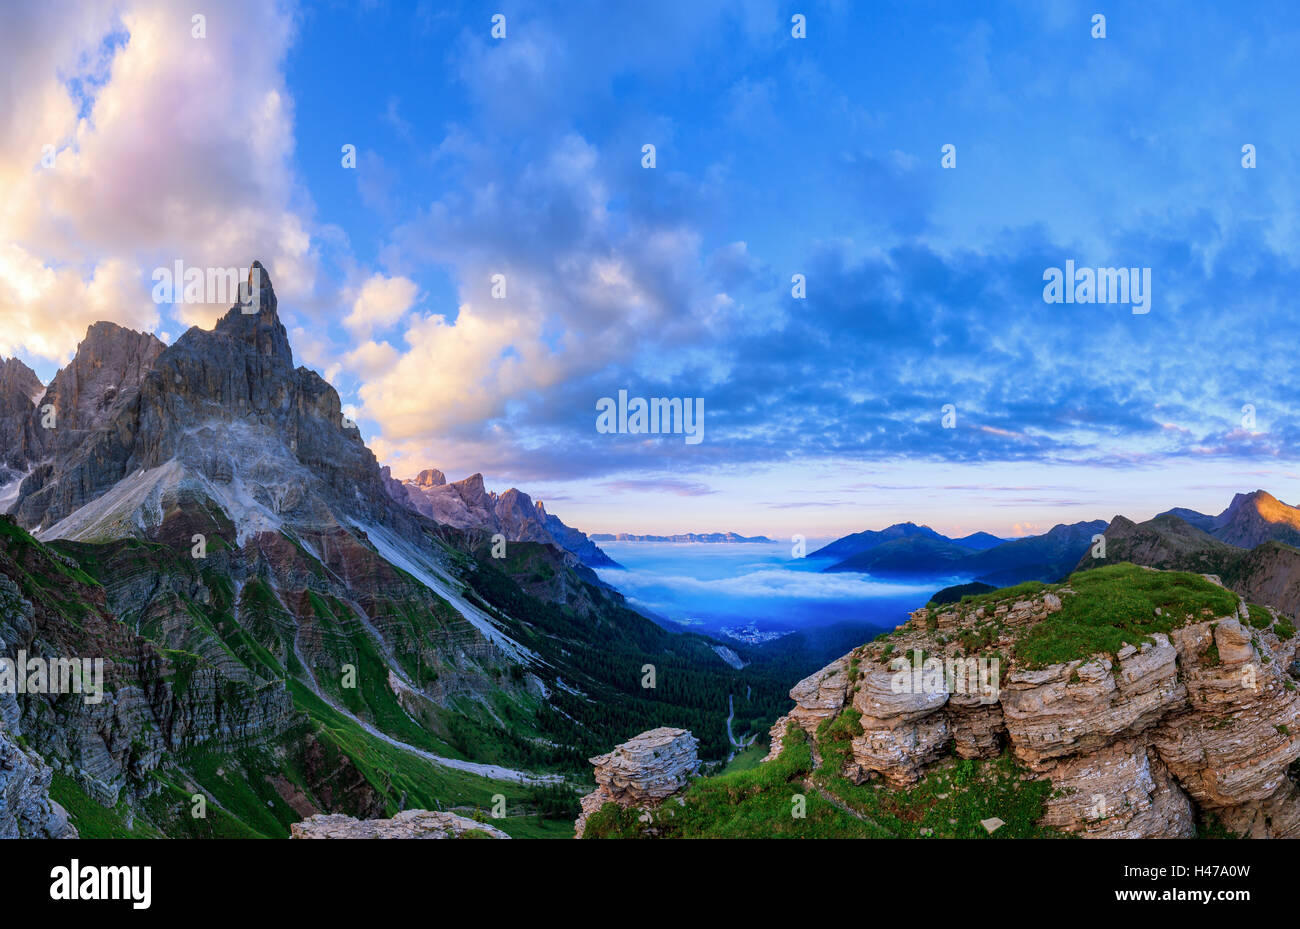 The Rolle Pass (Passo Rolle) at sunrise, Trentino, Italy Stock Photo